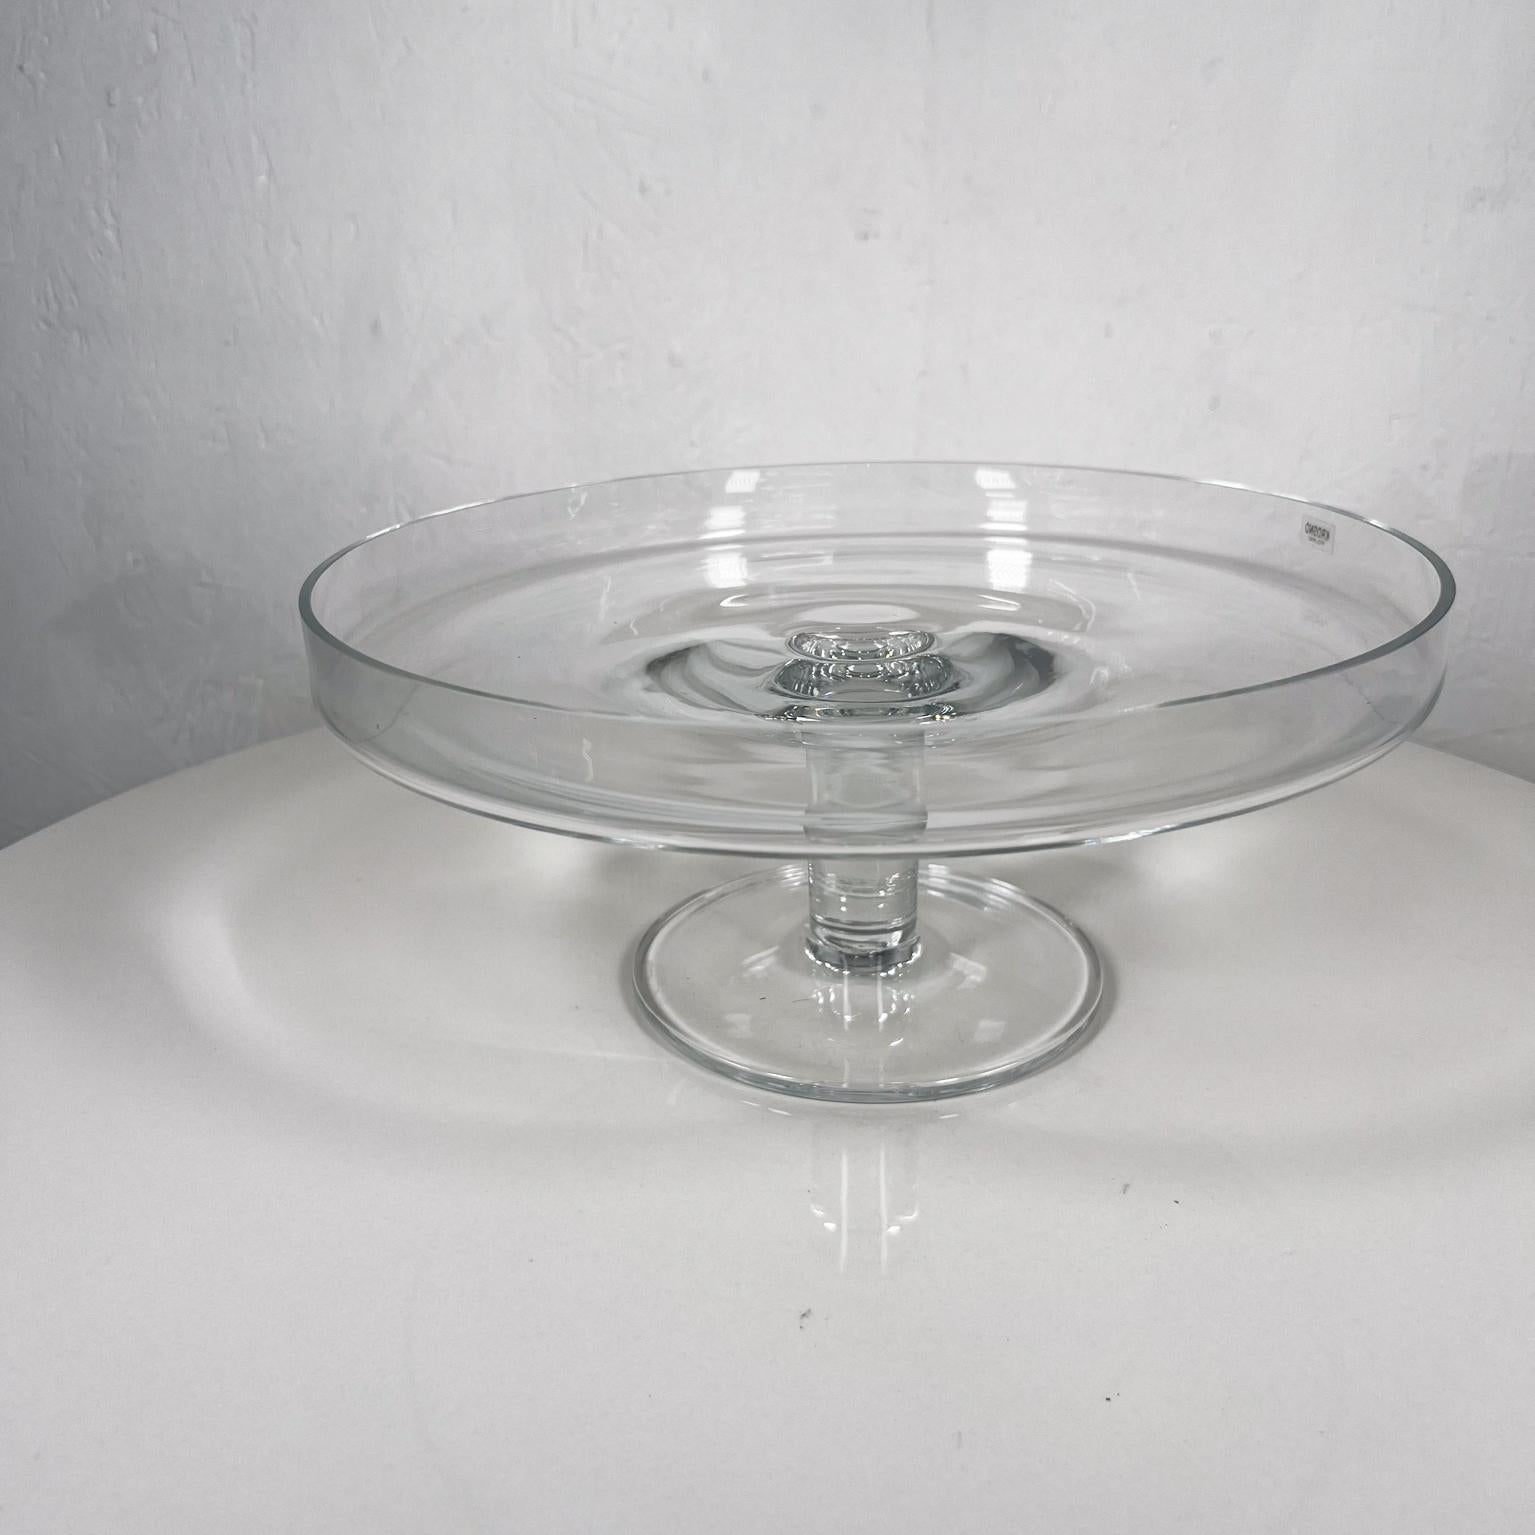 Exquisite Modern Large Domed Pedestal Glass Cake Stand 1